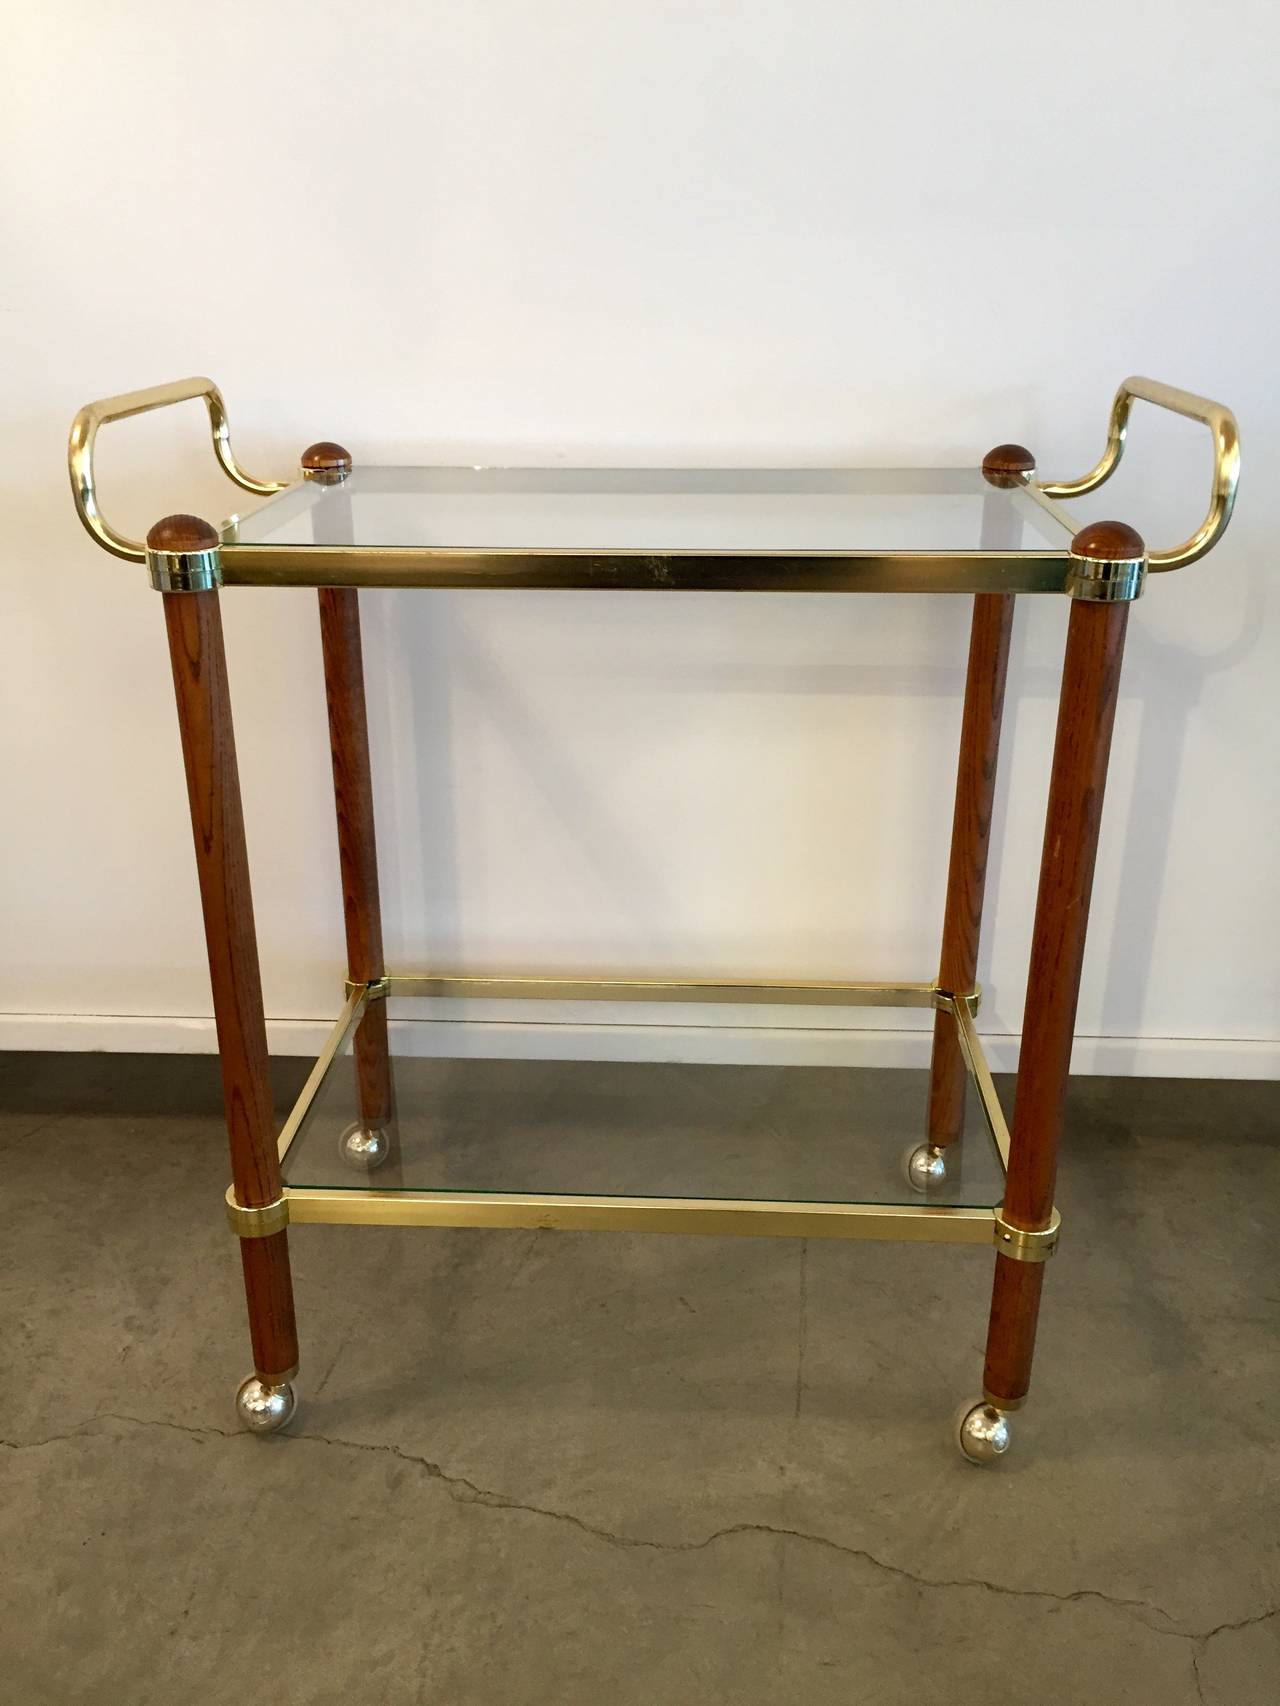 Two-tier glamorous high gloss brass, glass and redwood mid-century modern Italian bar cart. This piece just begs for a high glam cocktail hour!